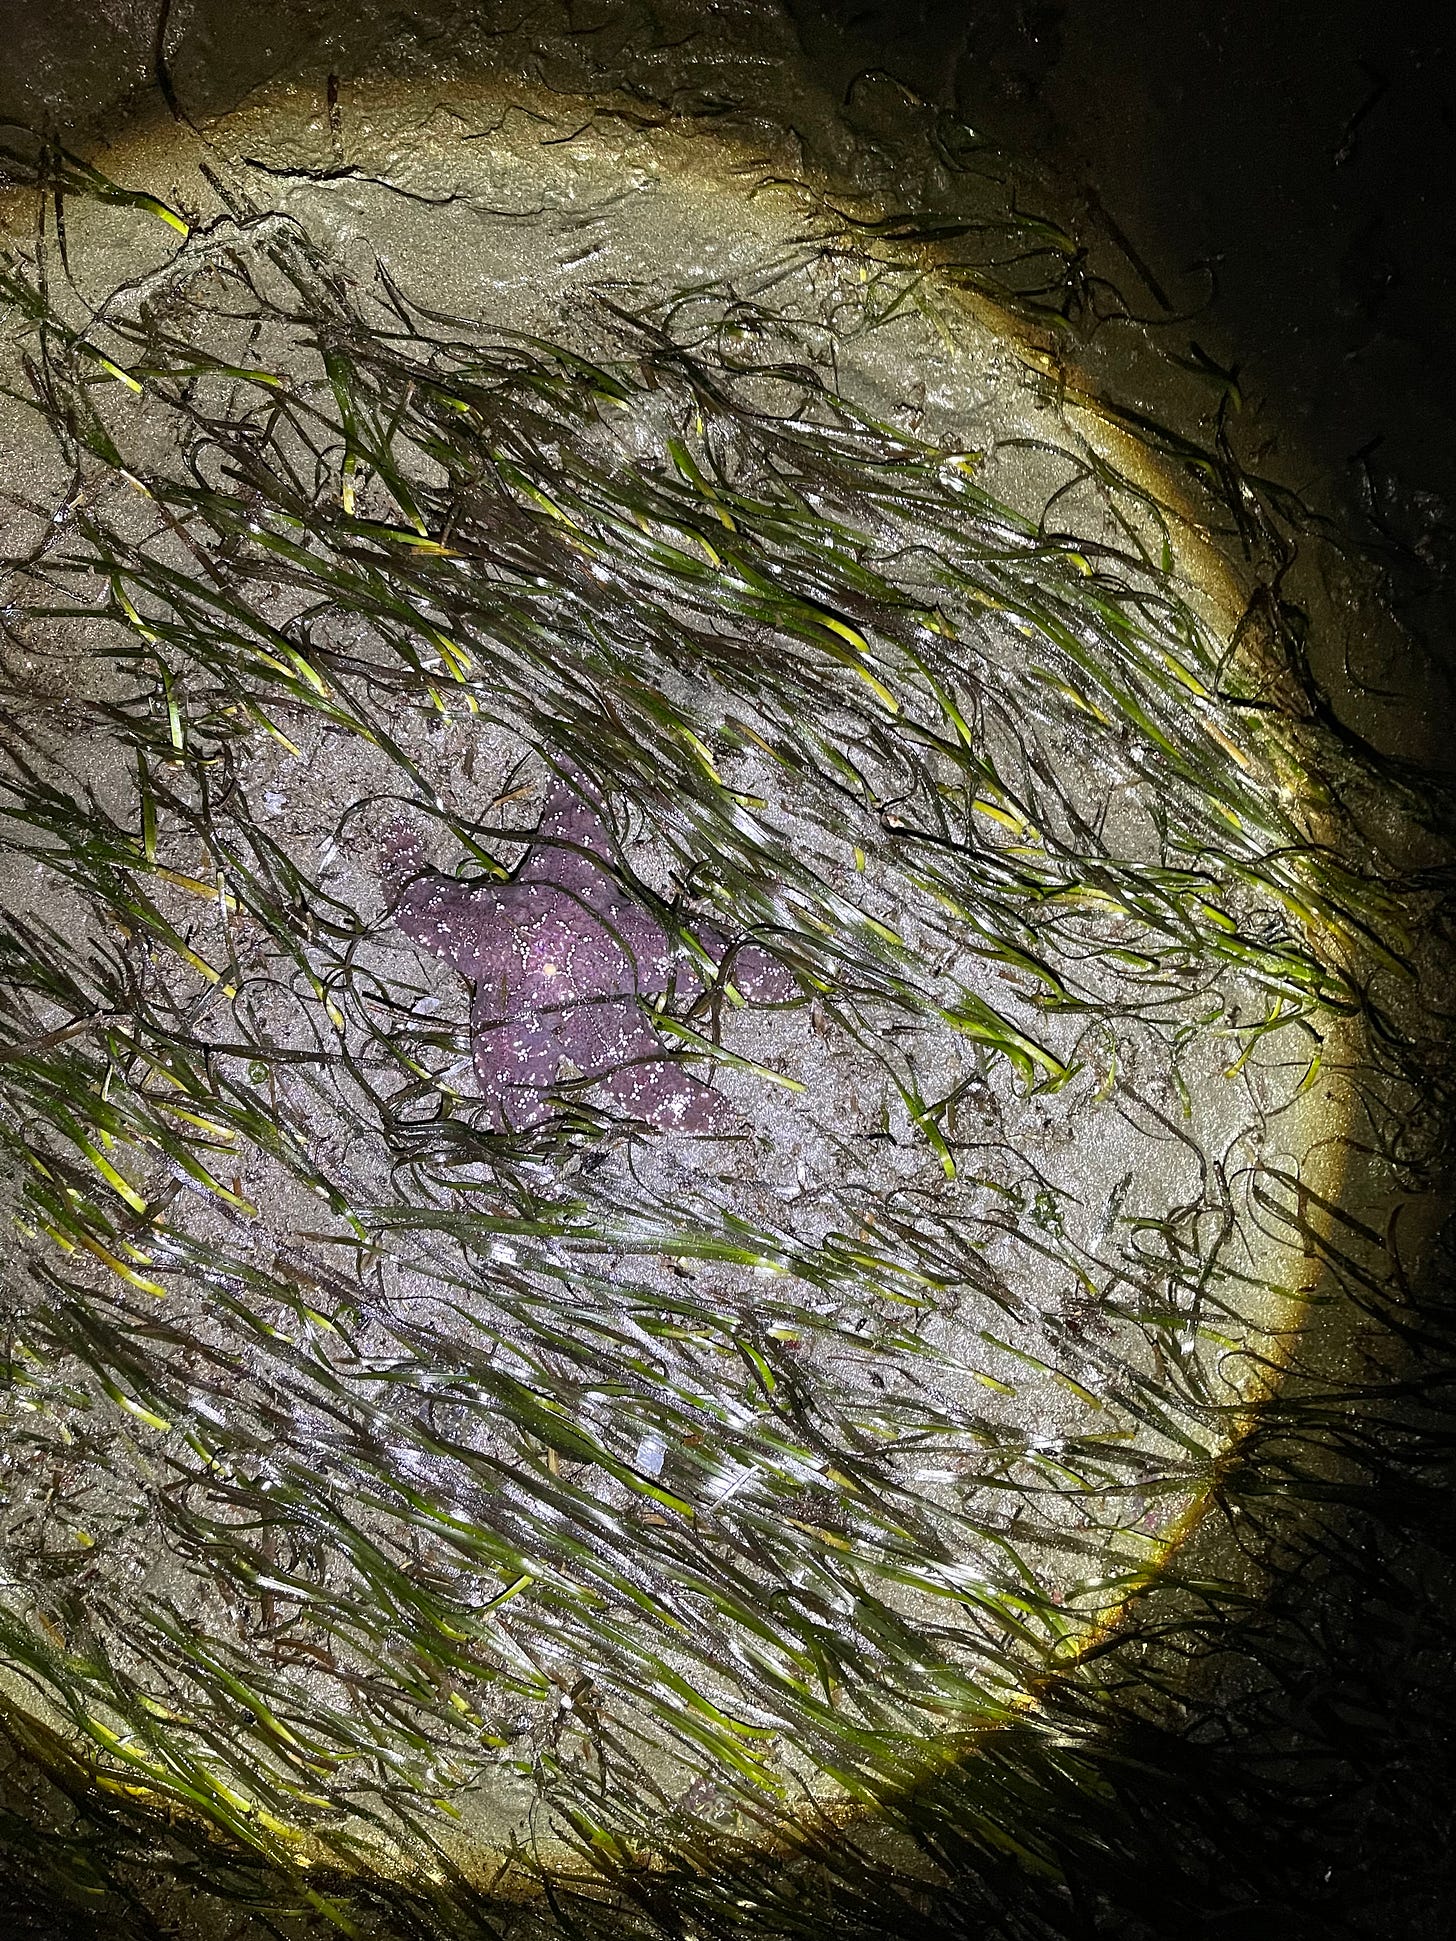 a purple starfish in the sand with seagrass around it